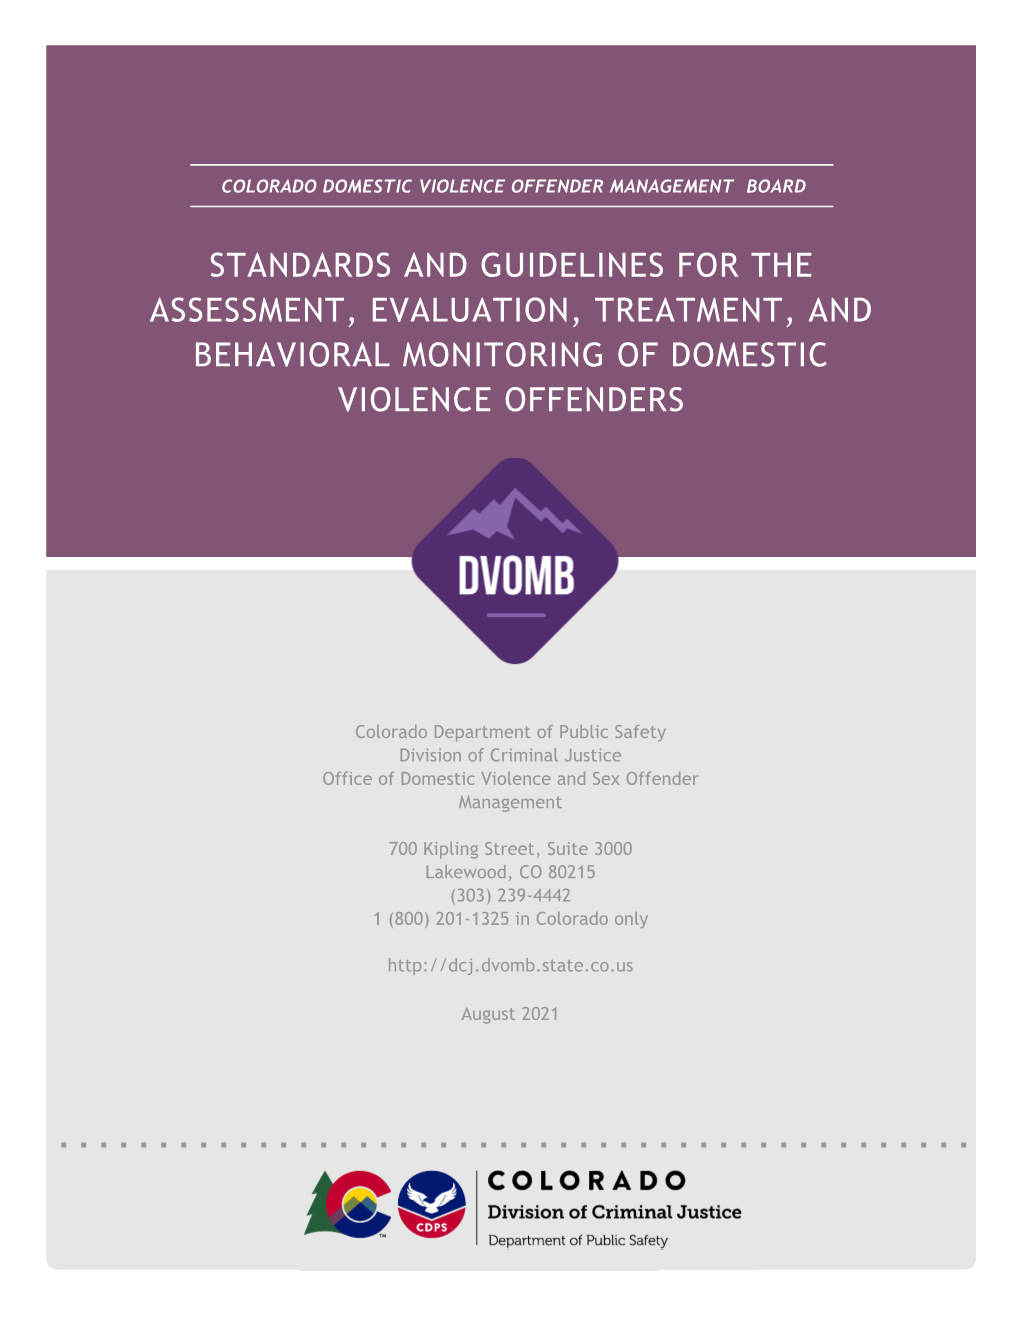 Standards and Guidelines for Domestic Violence Offenders